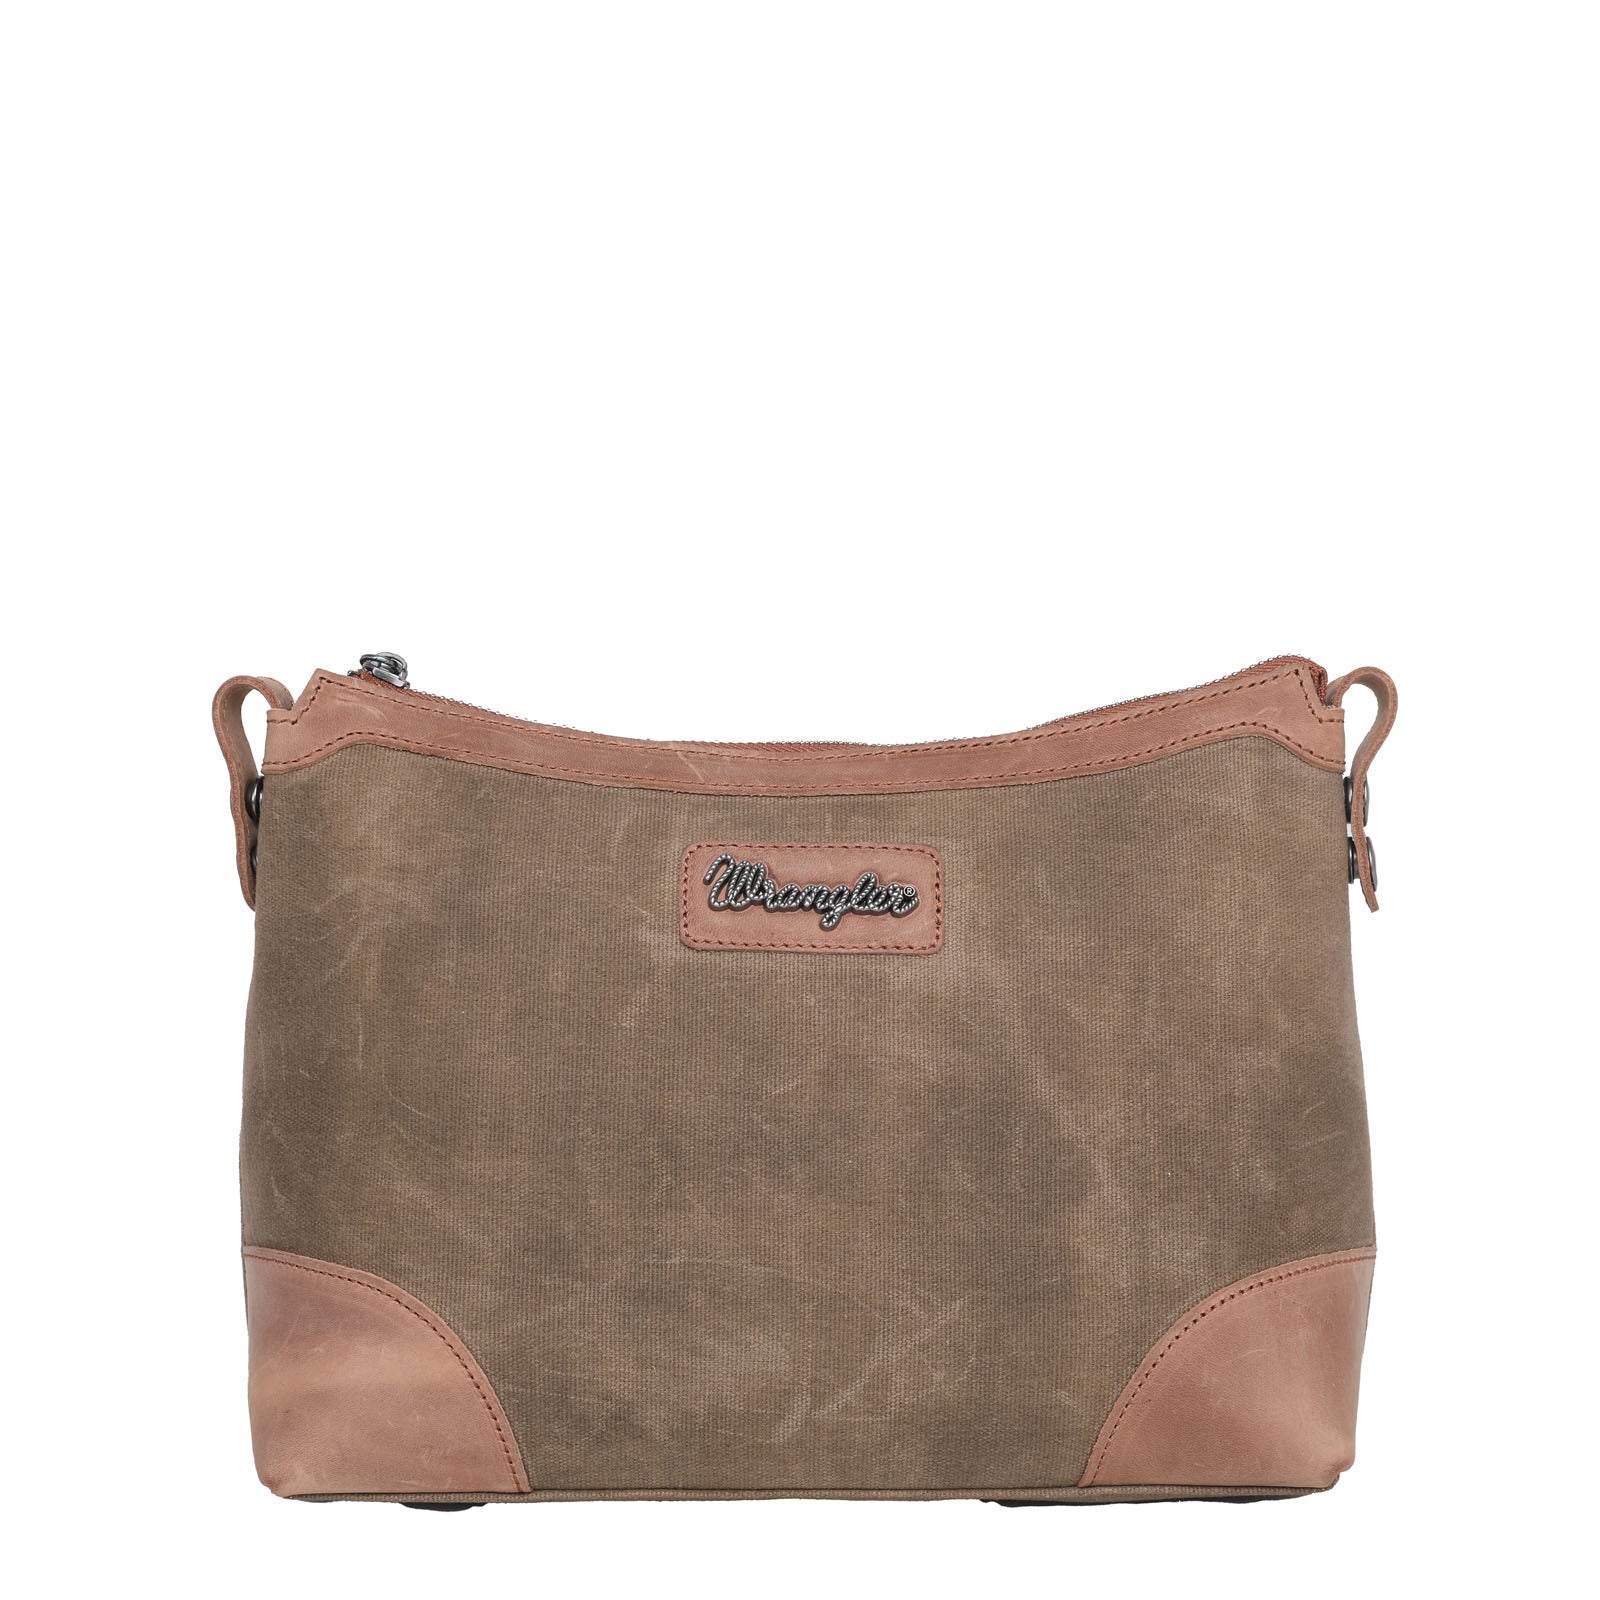 Wrangler Full Distressed Leather Concealed Carry Tote with detachable crossbody bag - Cowgirl Wear